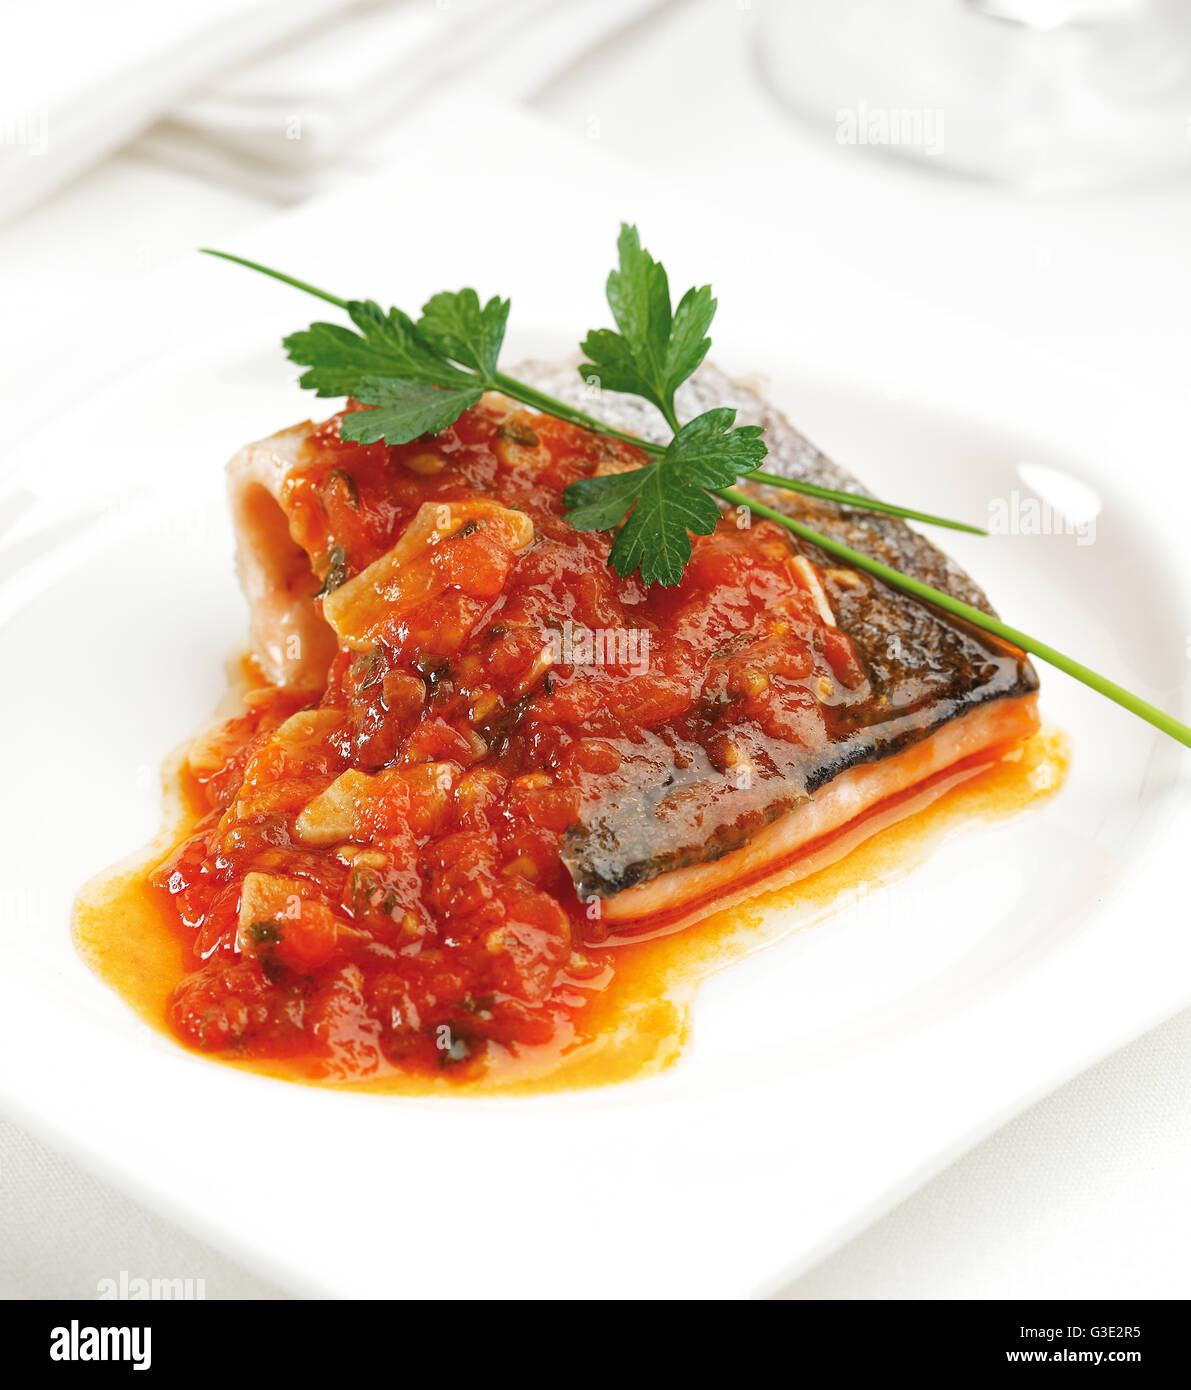 Fried trout fillet with a tomato, onion and garlic sauce. Stock Photo